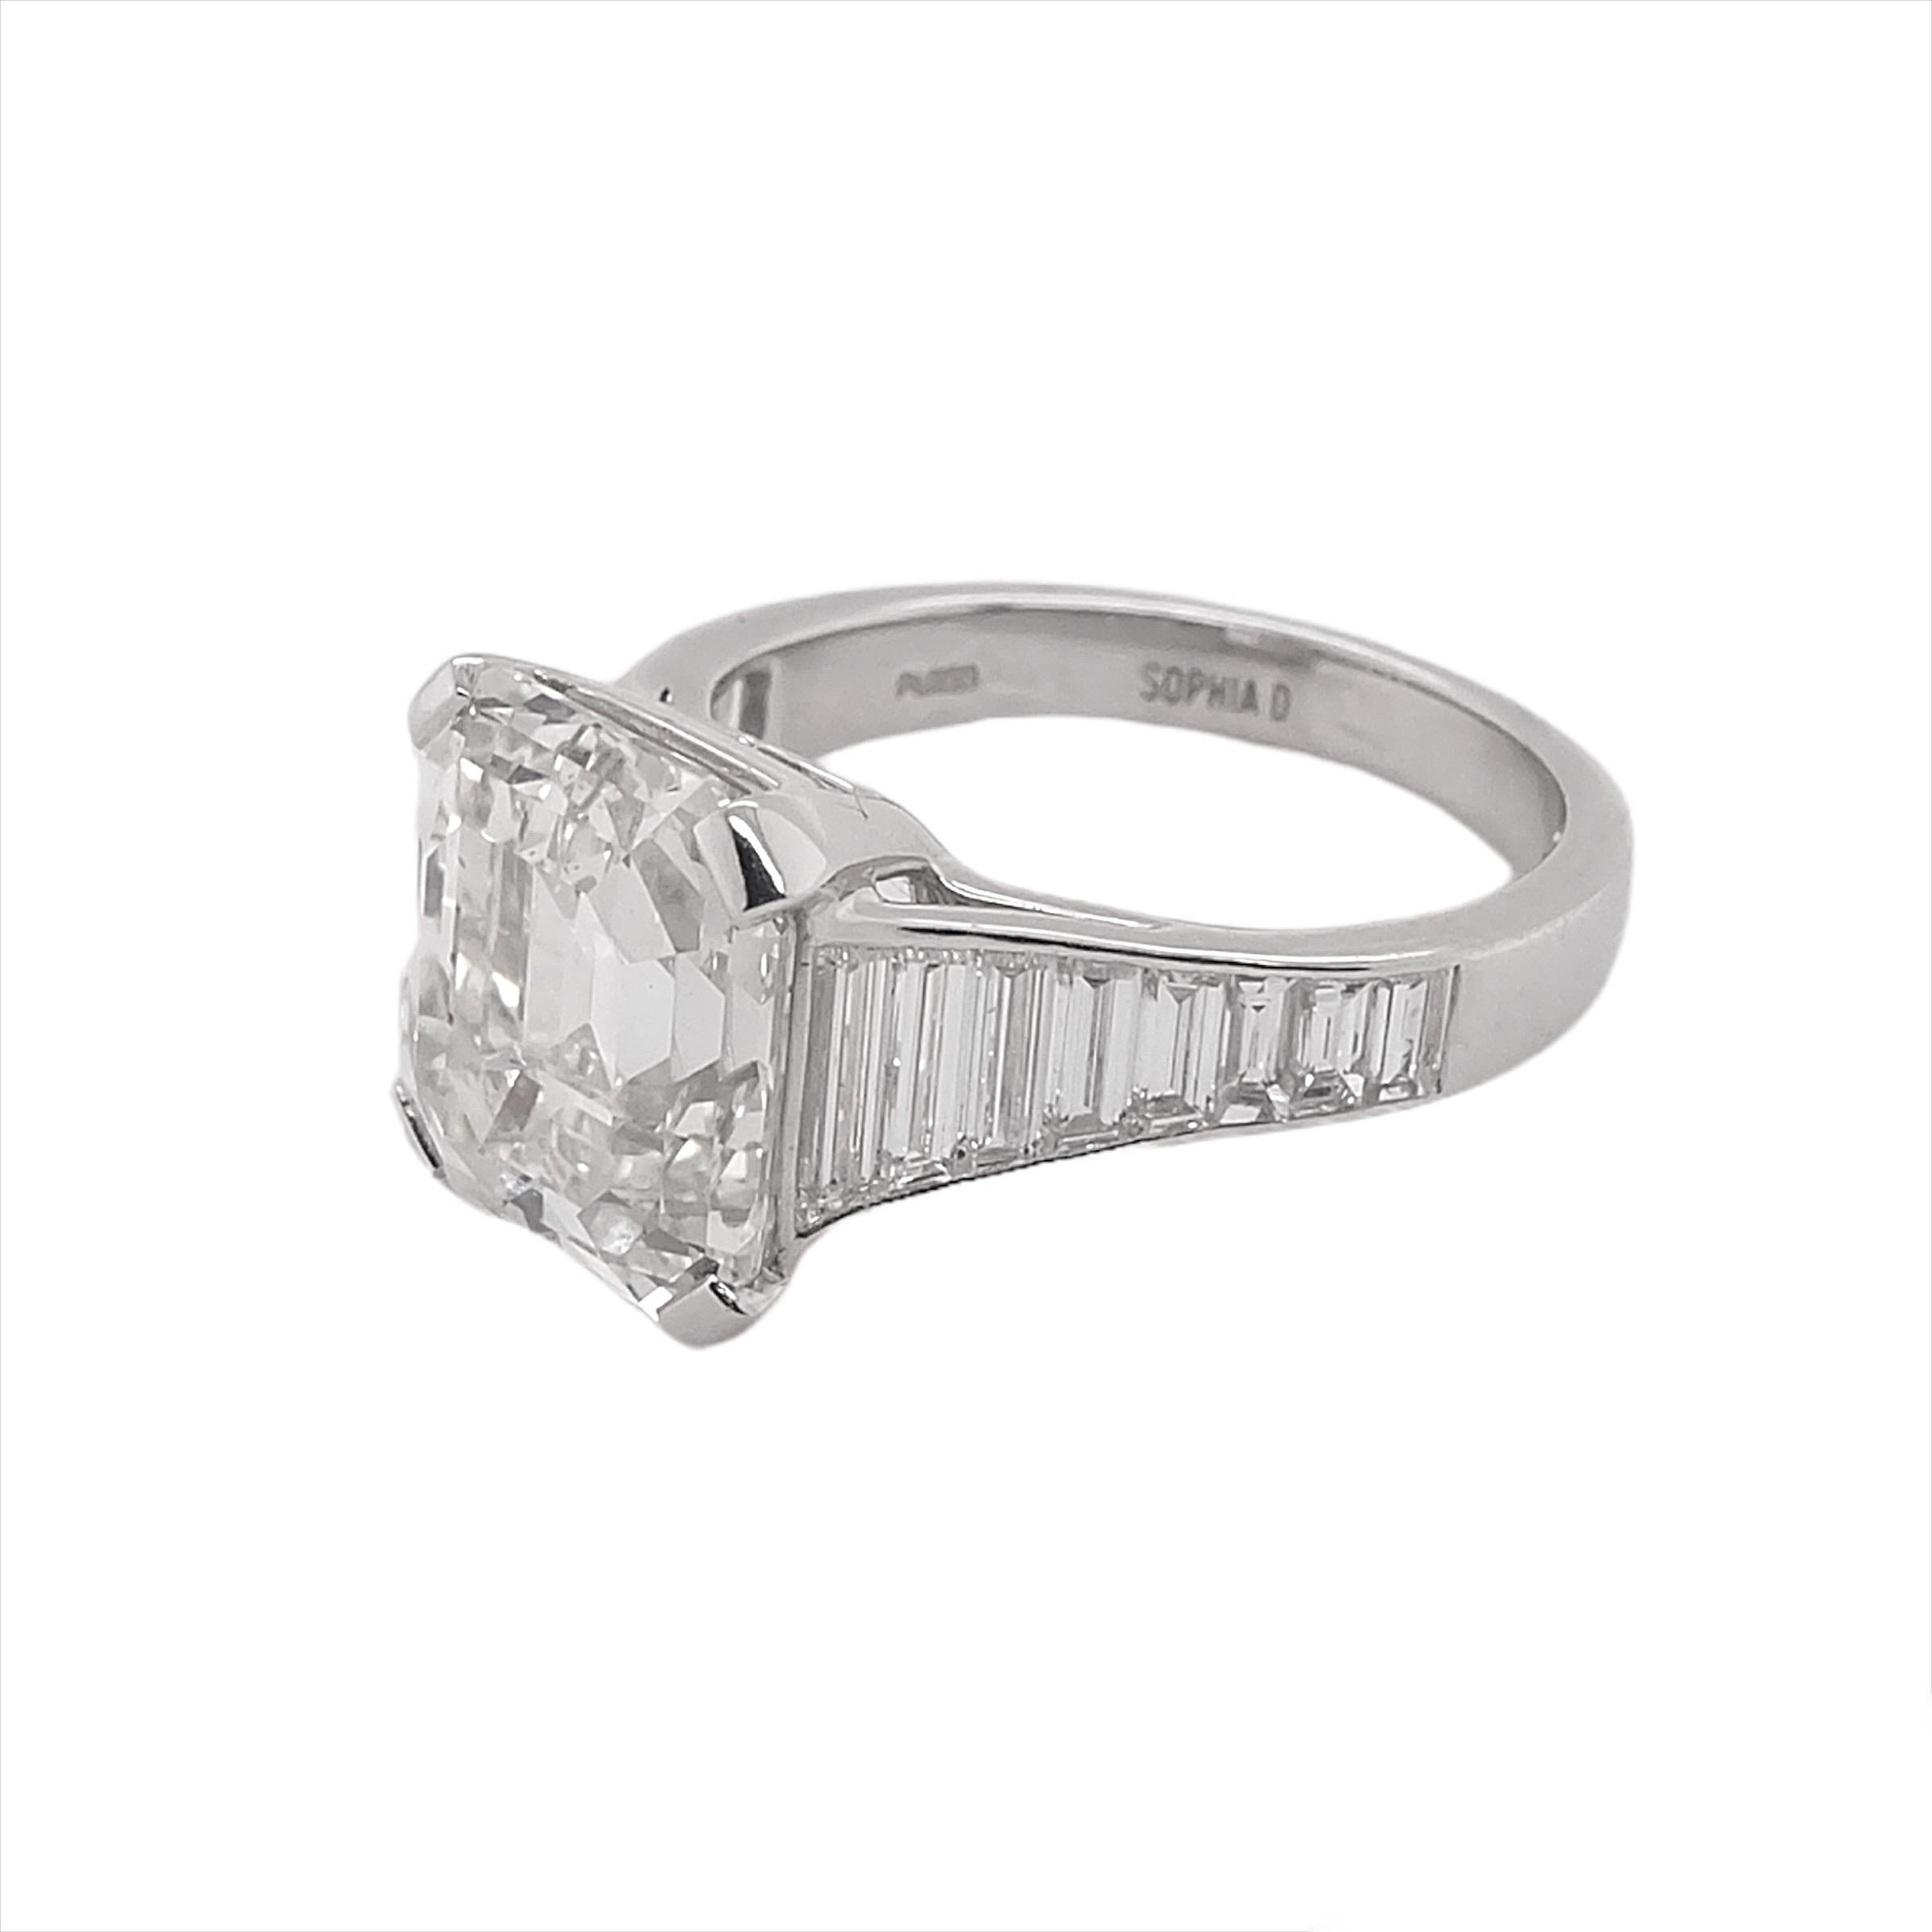 GIA certified diamond ring features a diamond center stone that weighs 6.04 carat with a color and clarity of L- VVS2 and accentuated with baguette cut diamonds that weigh 0.85 carat and small diamonds that weigh 0.27 carat.